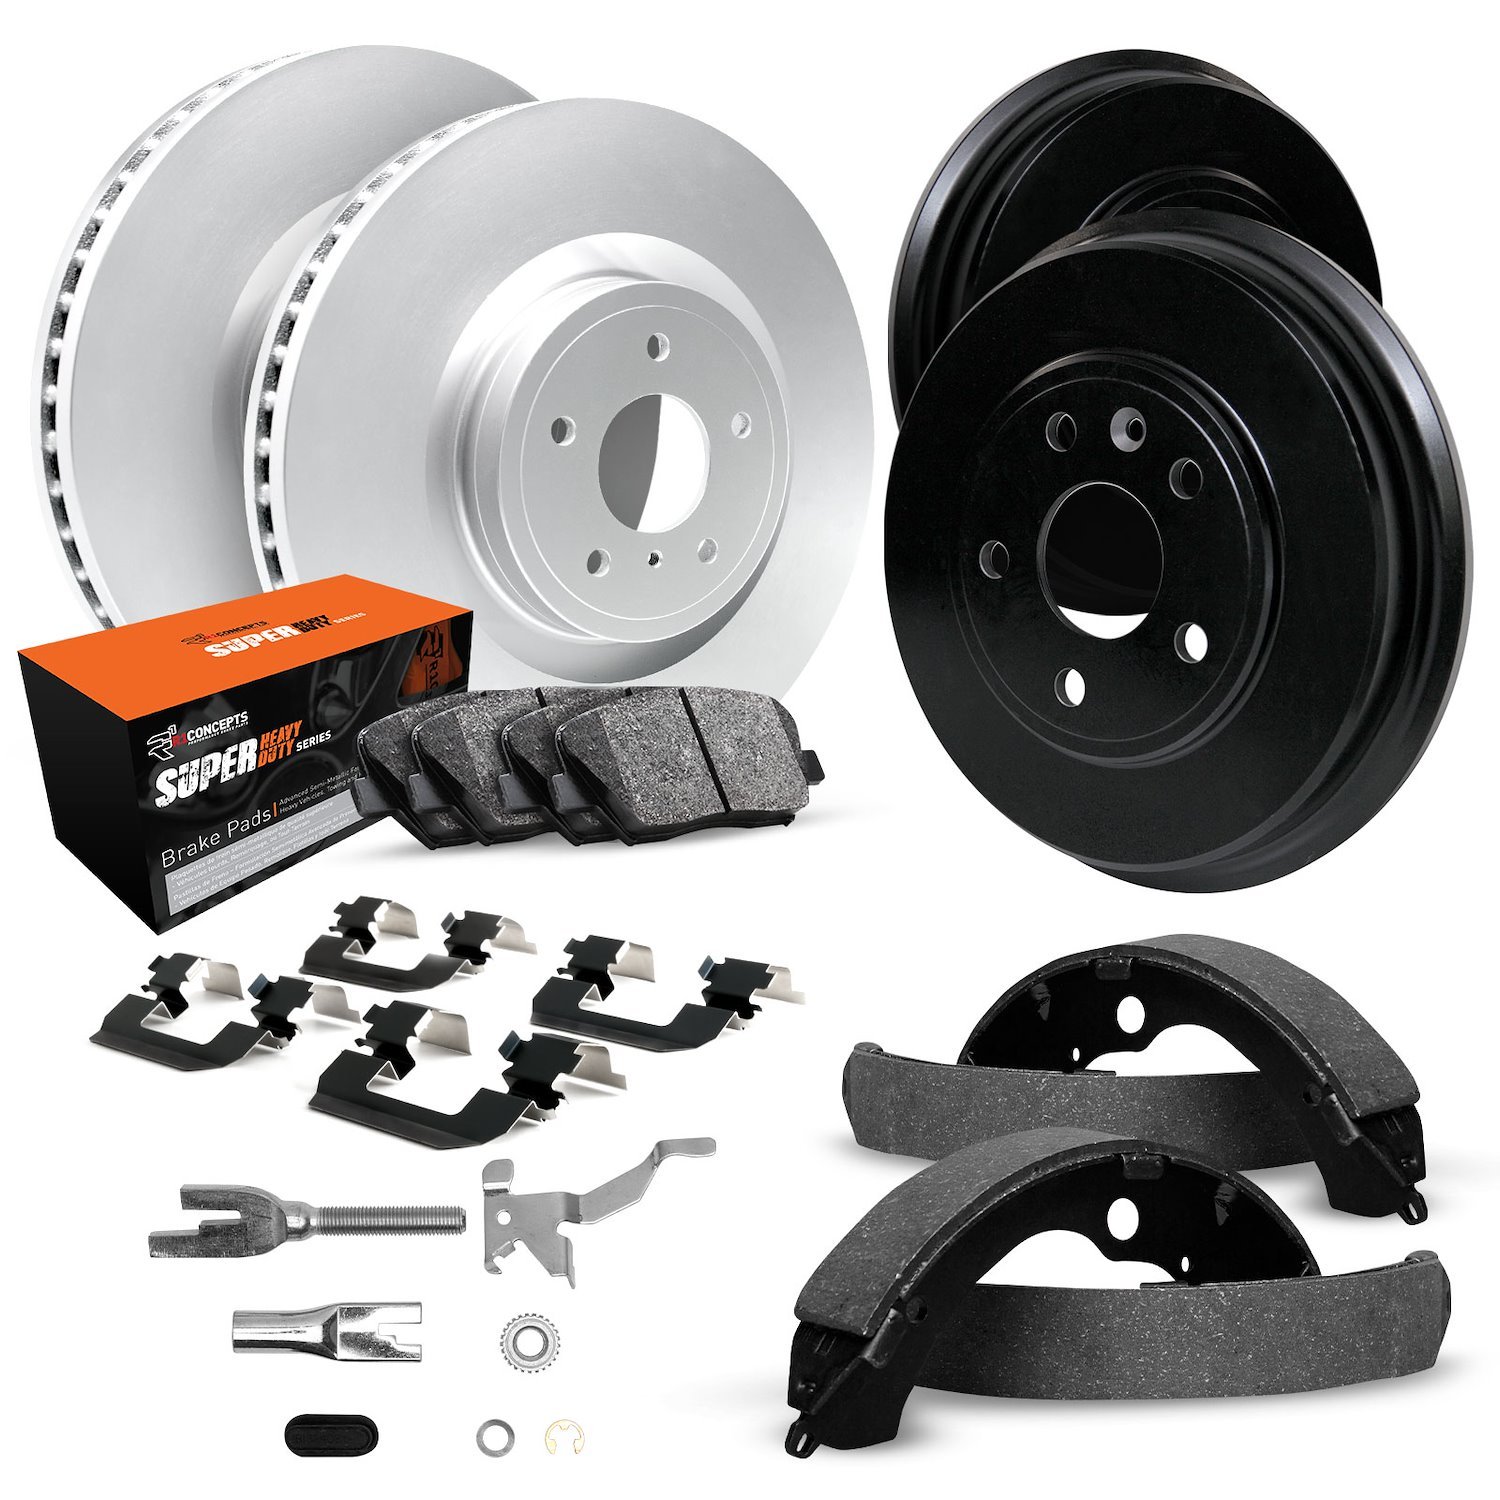 GEO-Carbon Brake Rotor & Drum Set w/Super-Duty Pads, Shoes, Hardware/Adjusters, 1976-1978 GM, Position: Front & Rear